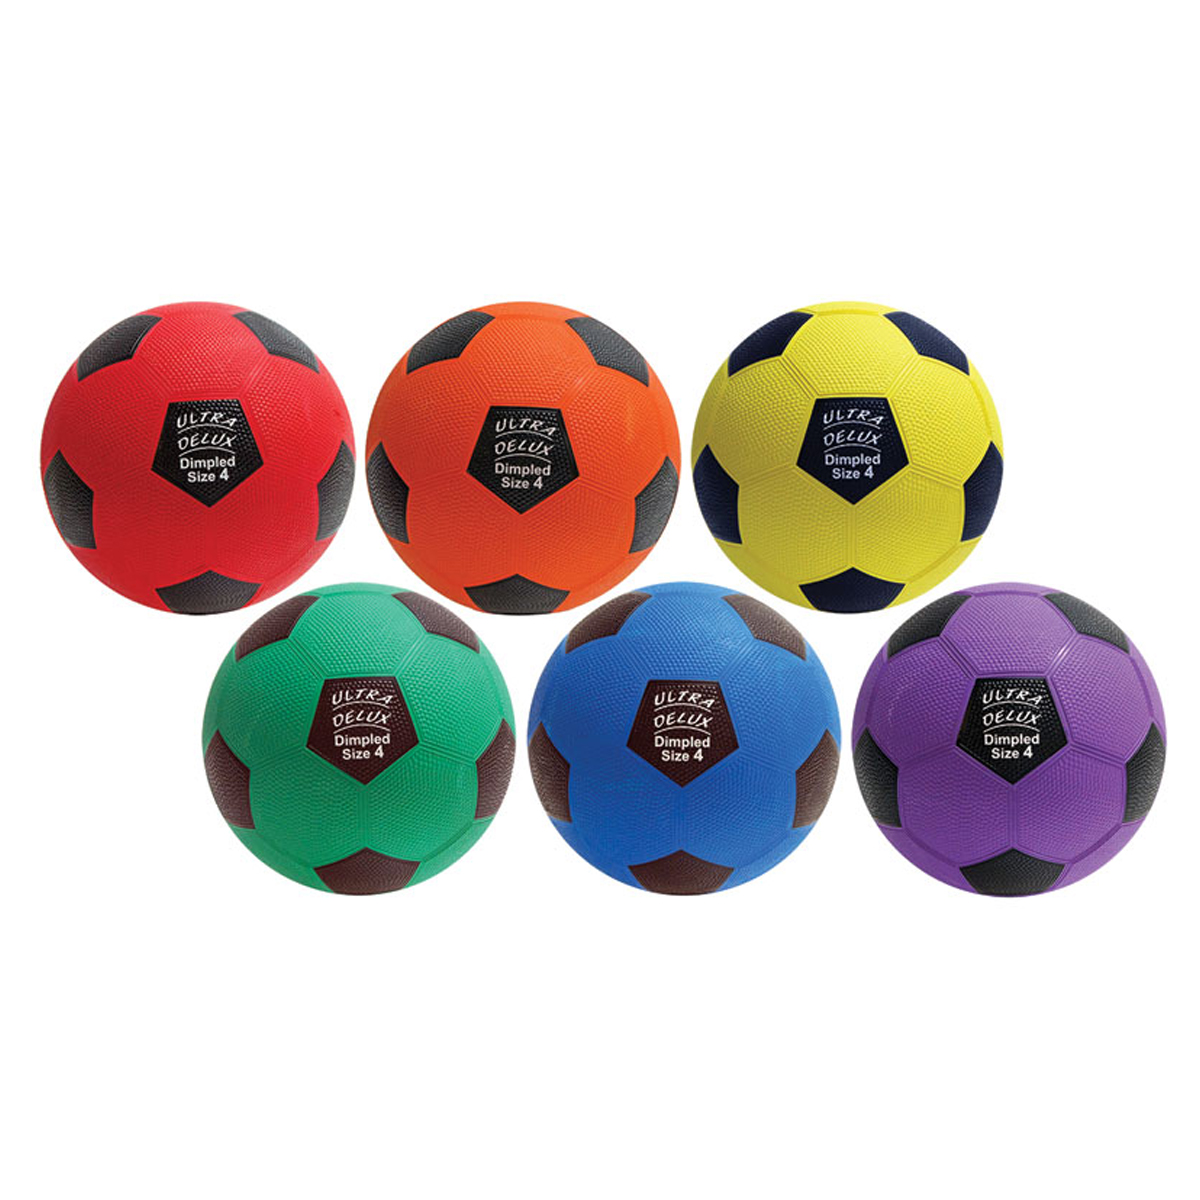 Ultra Delux Dimpled Rubber Size 4 Soccer Ball (assorted colors)